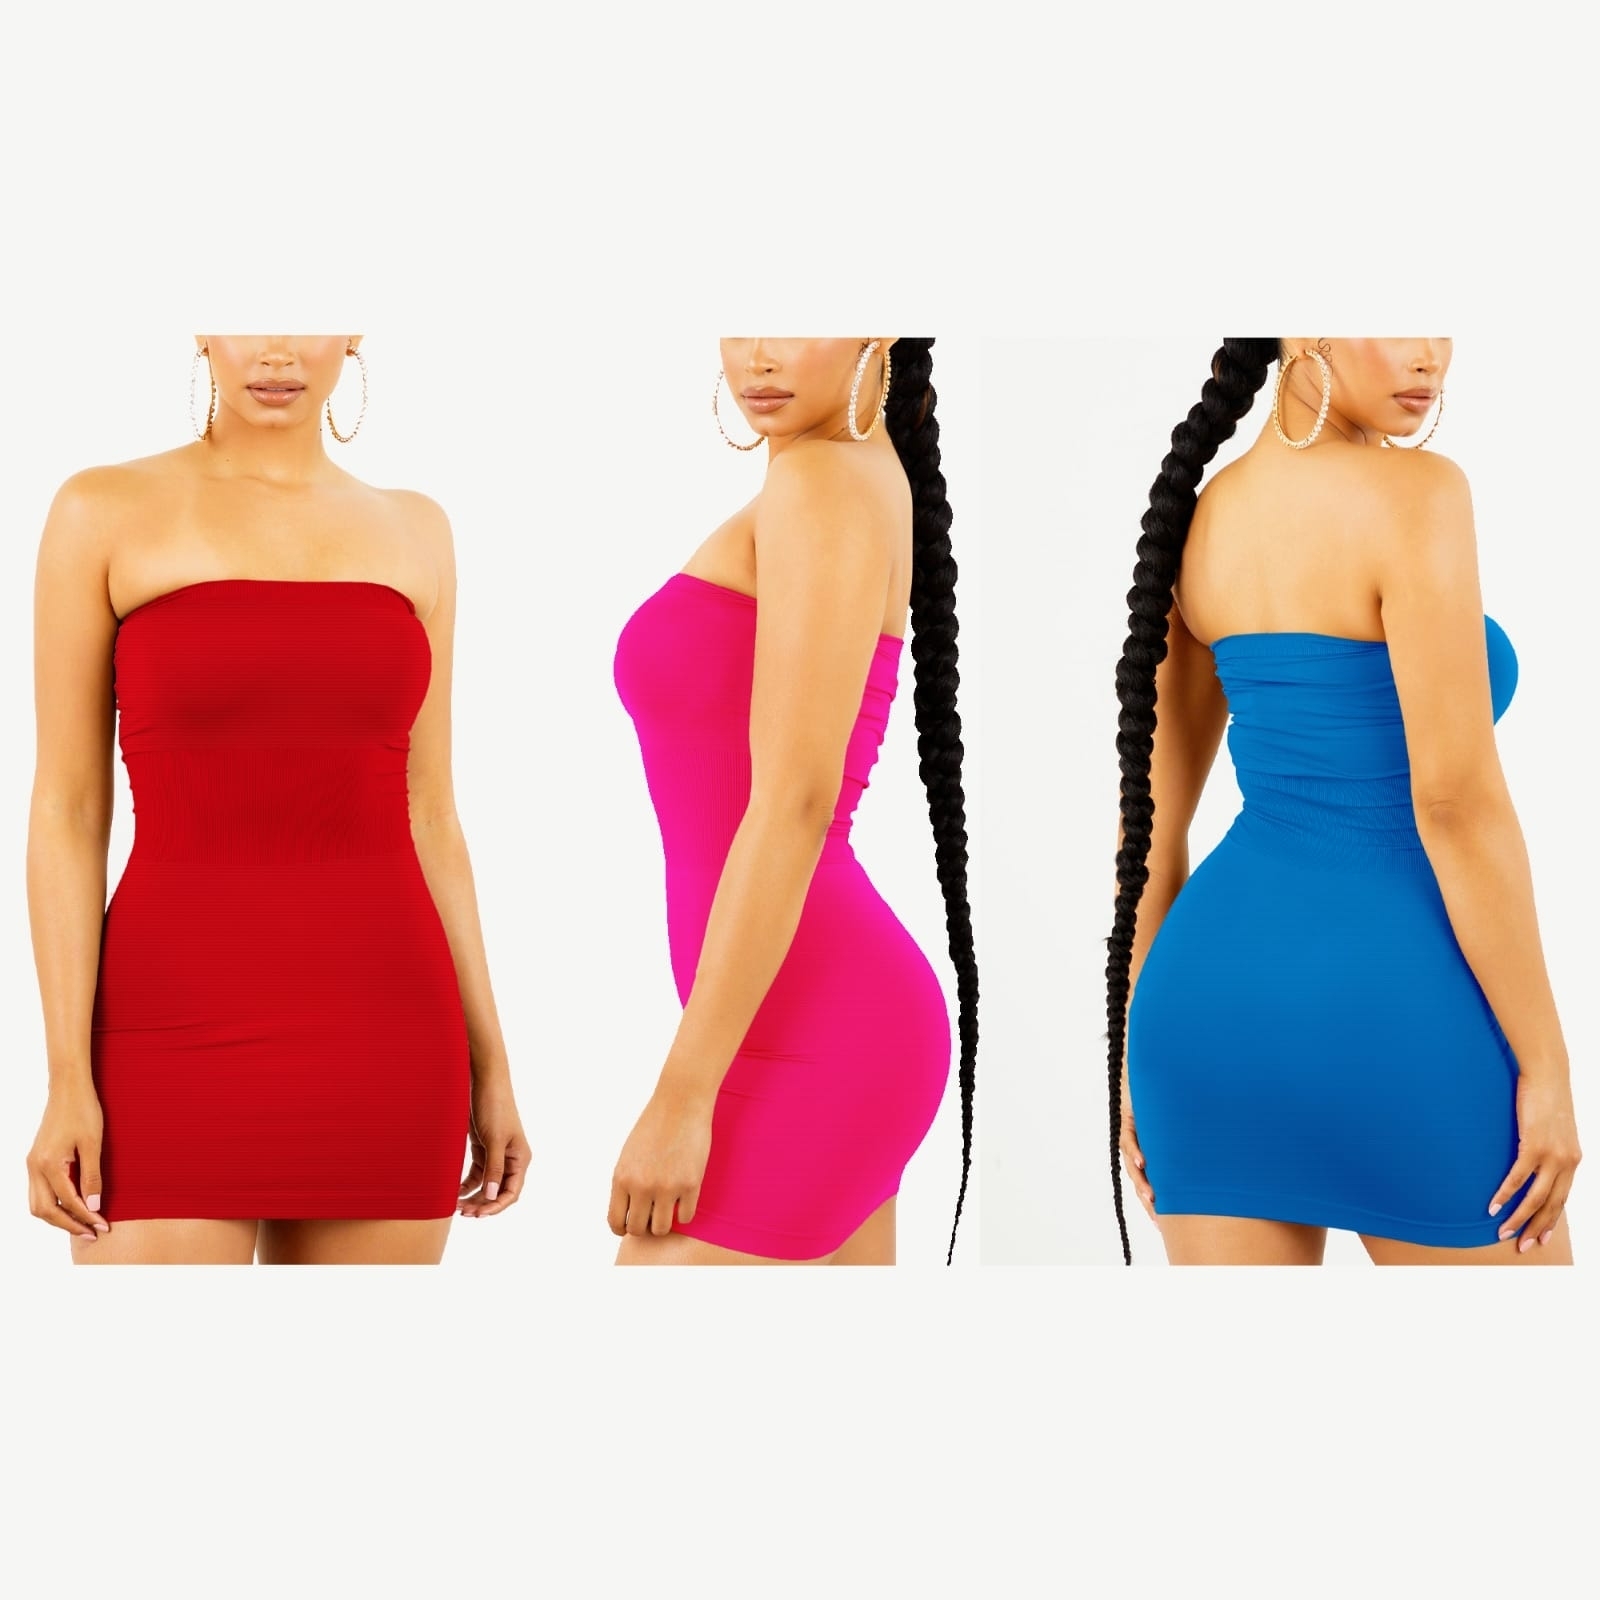 3-Pack Women's Strapless Stretchy Seamless Tight Fit Body Con Mini Tube Top Dress - RED, 2XL